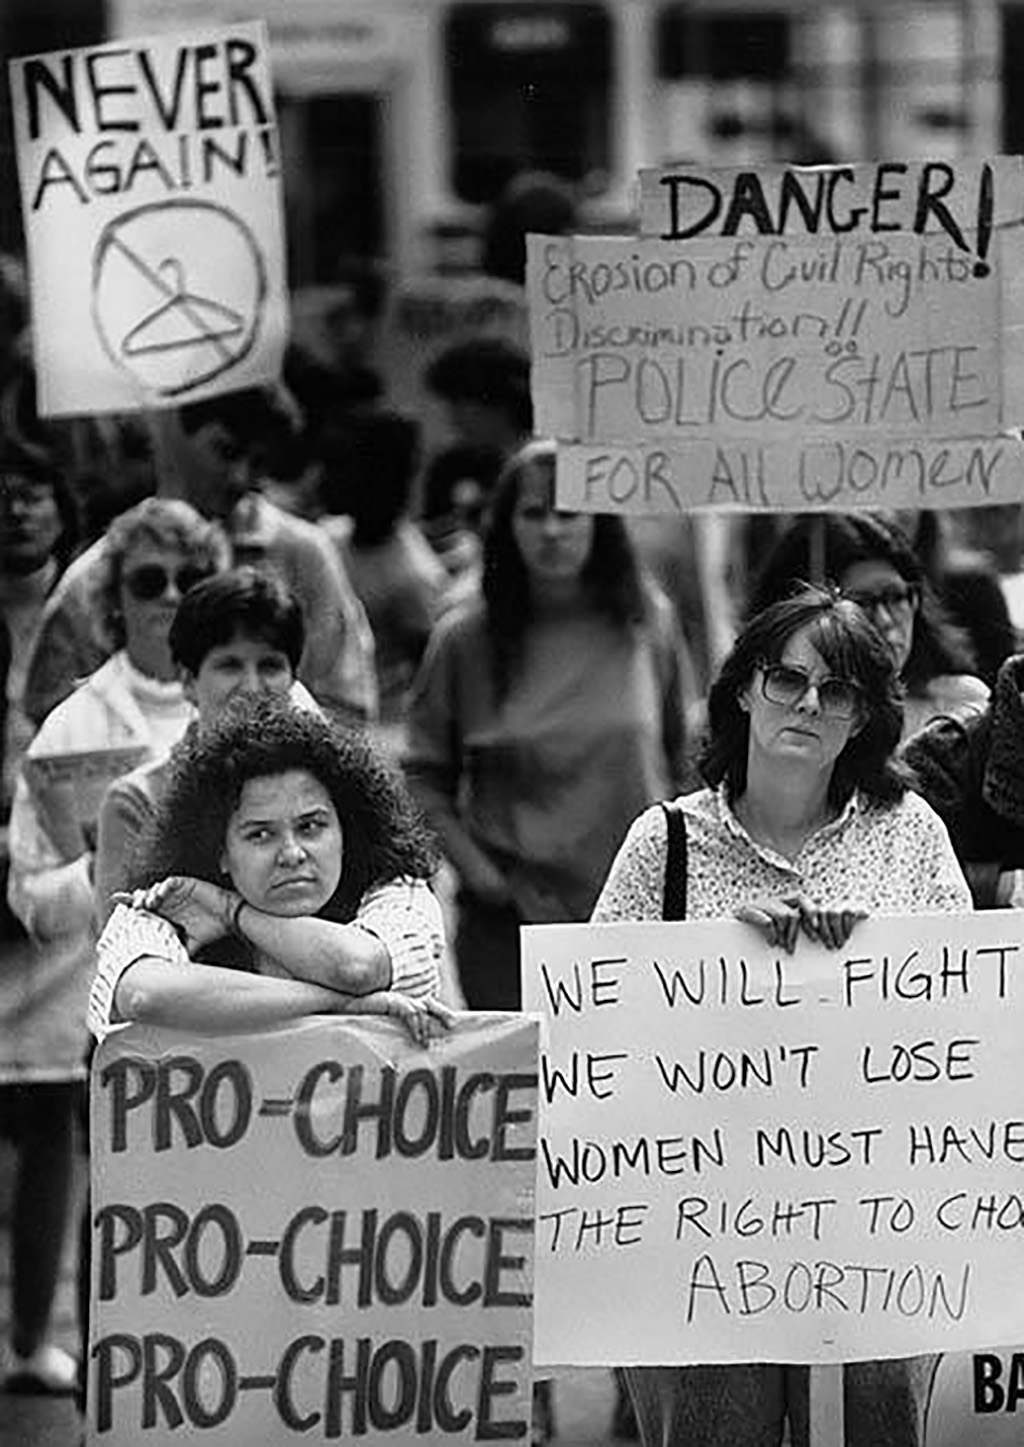 https://www.historylink.org/Content/Media/Photos/Large/radical-women-rally-outside-the-federal-courthouse-july-3-1989.jpg